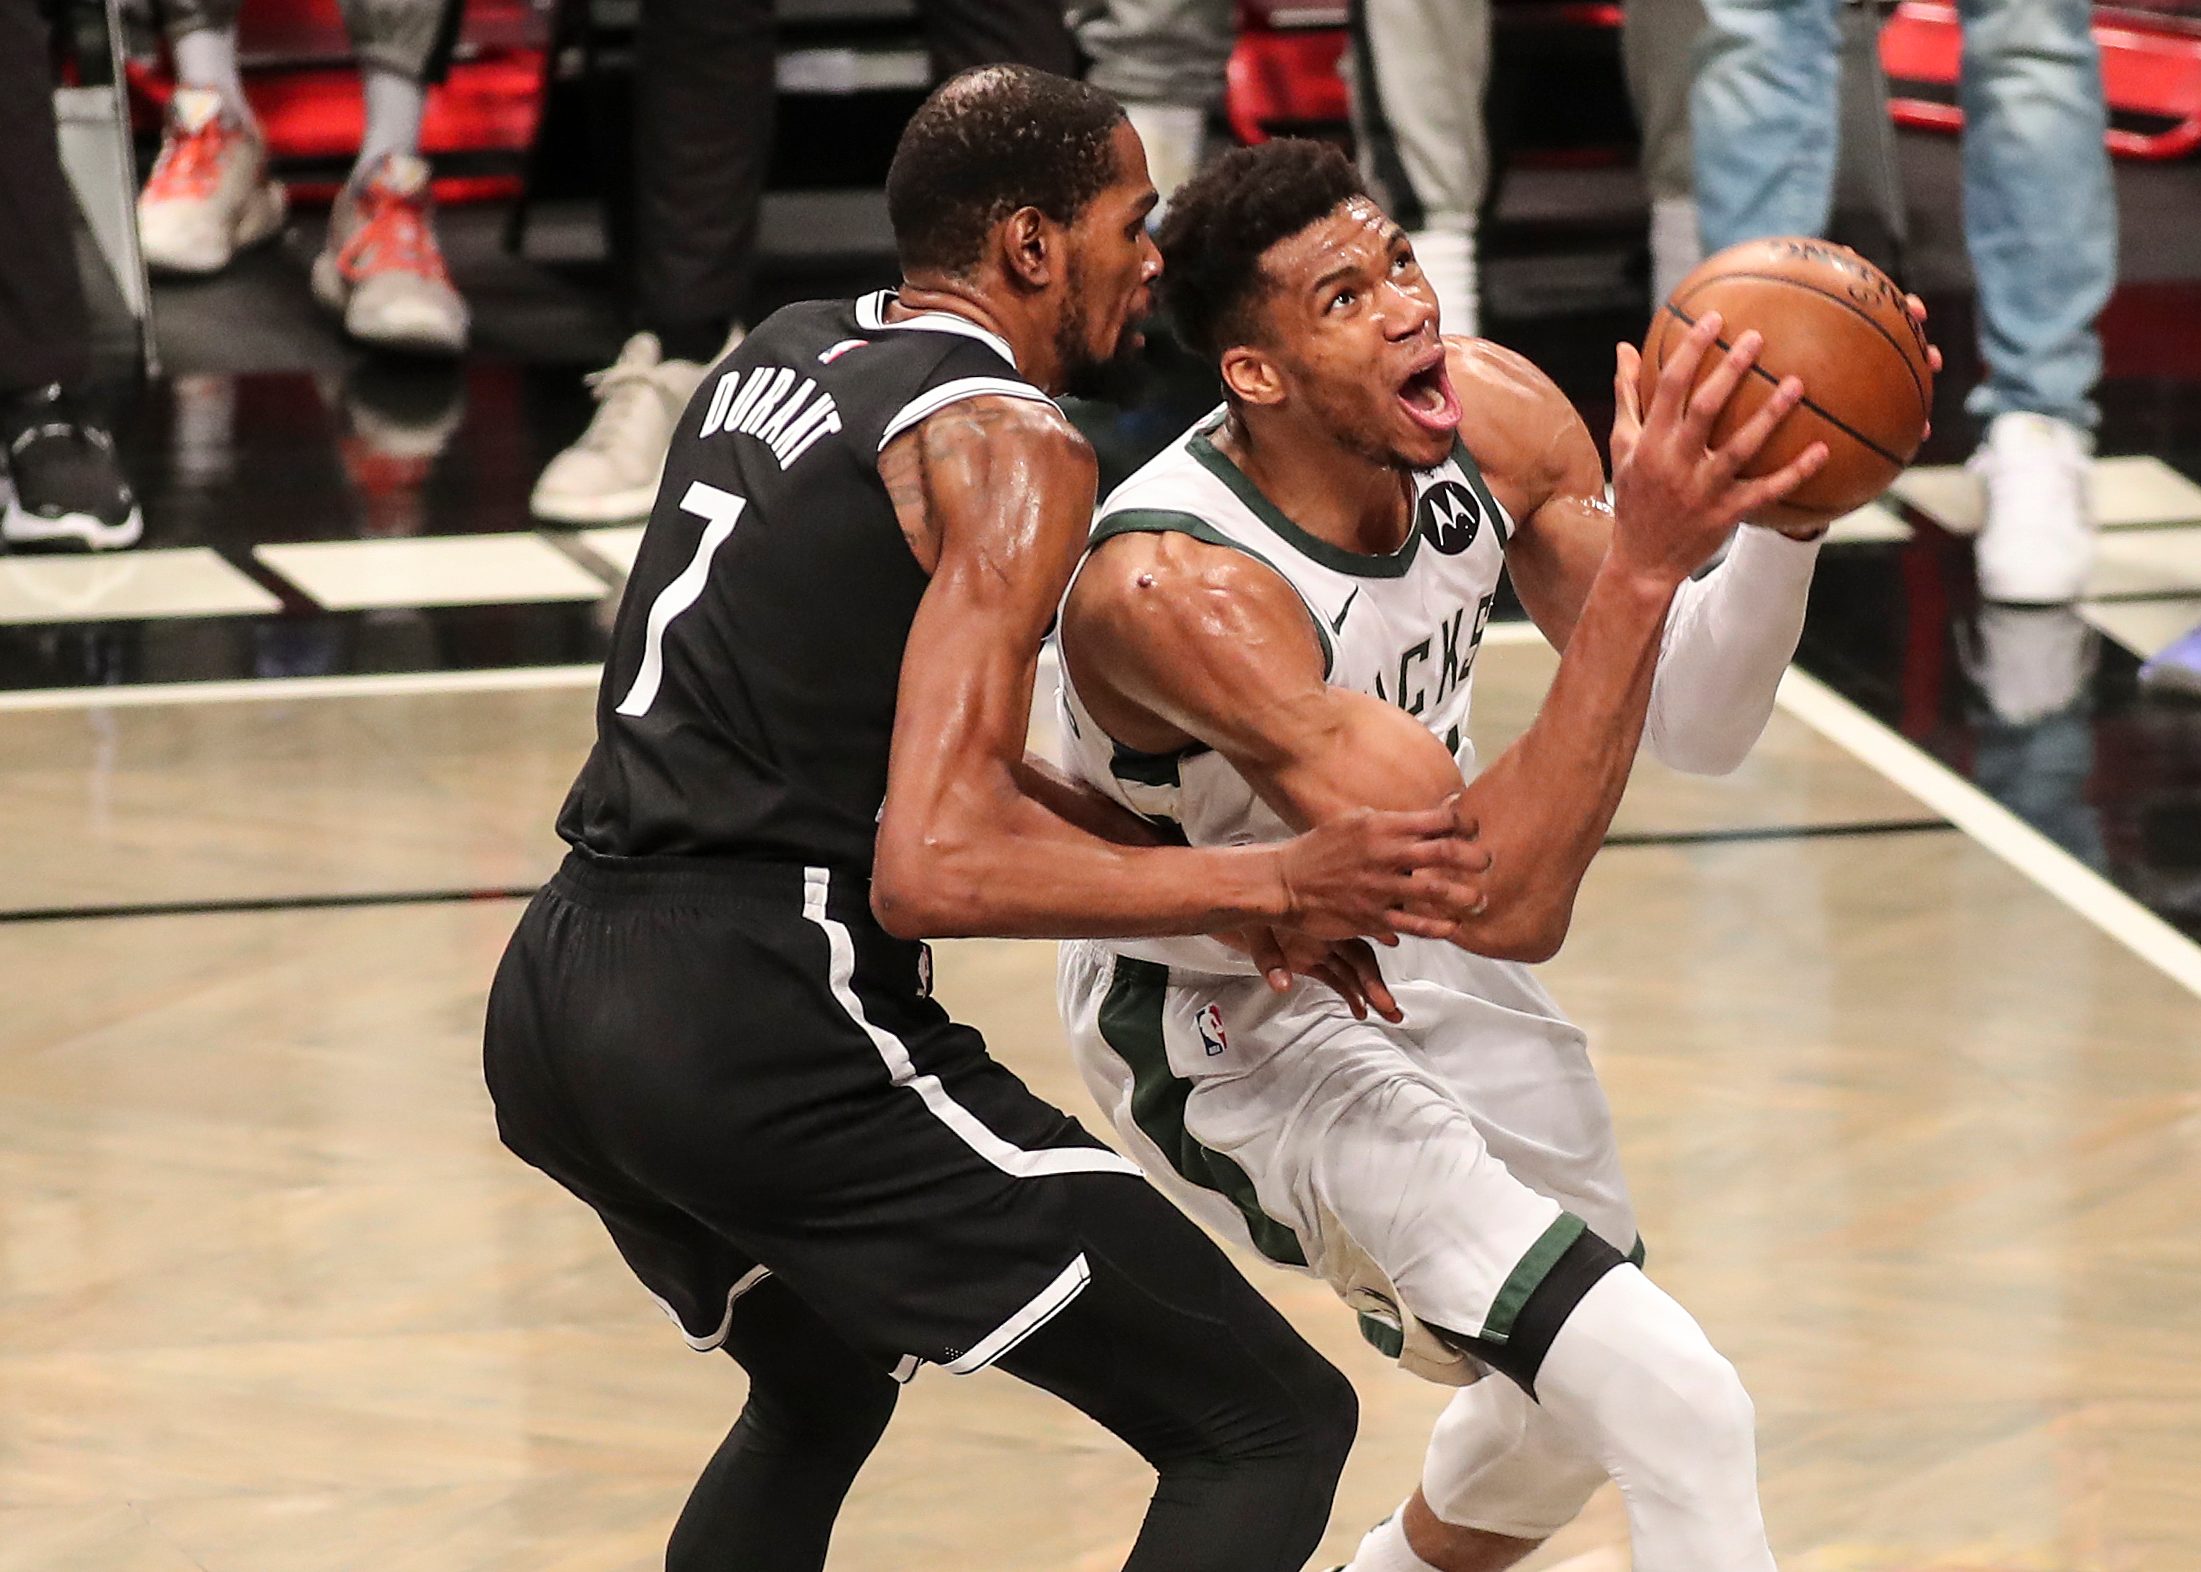 Giannis Antetokounmpo drops 40 as Bucks top Nets in epic Game 7